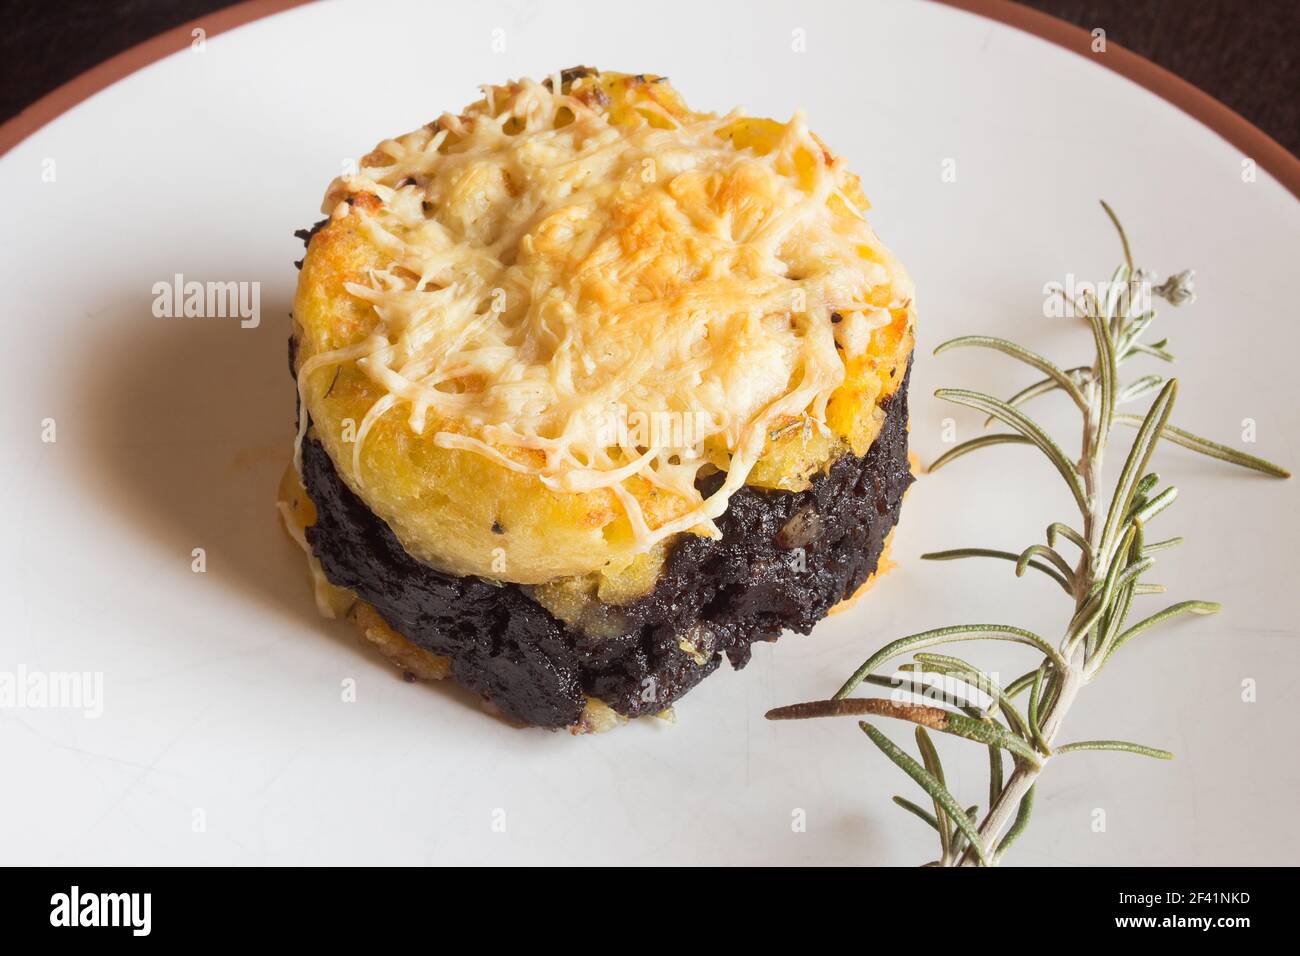 Close-up of a buttered potato pie with blood sausage topped with melted grated cheese on a plate next to a fresh sprig of rosemary. Homemade recipes. Stock Photo